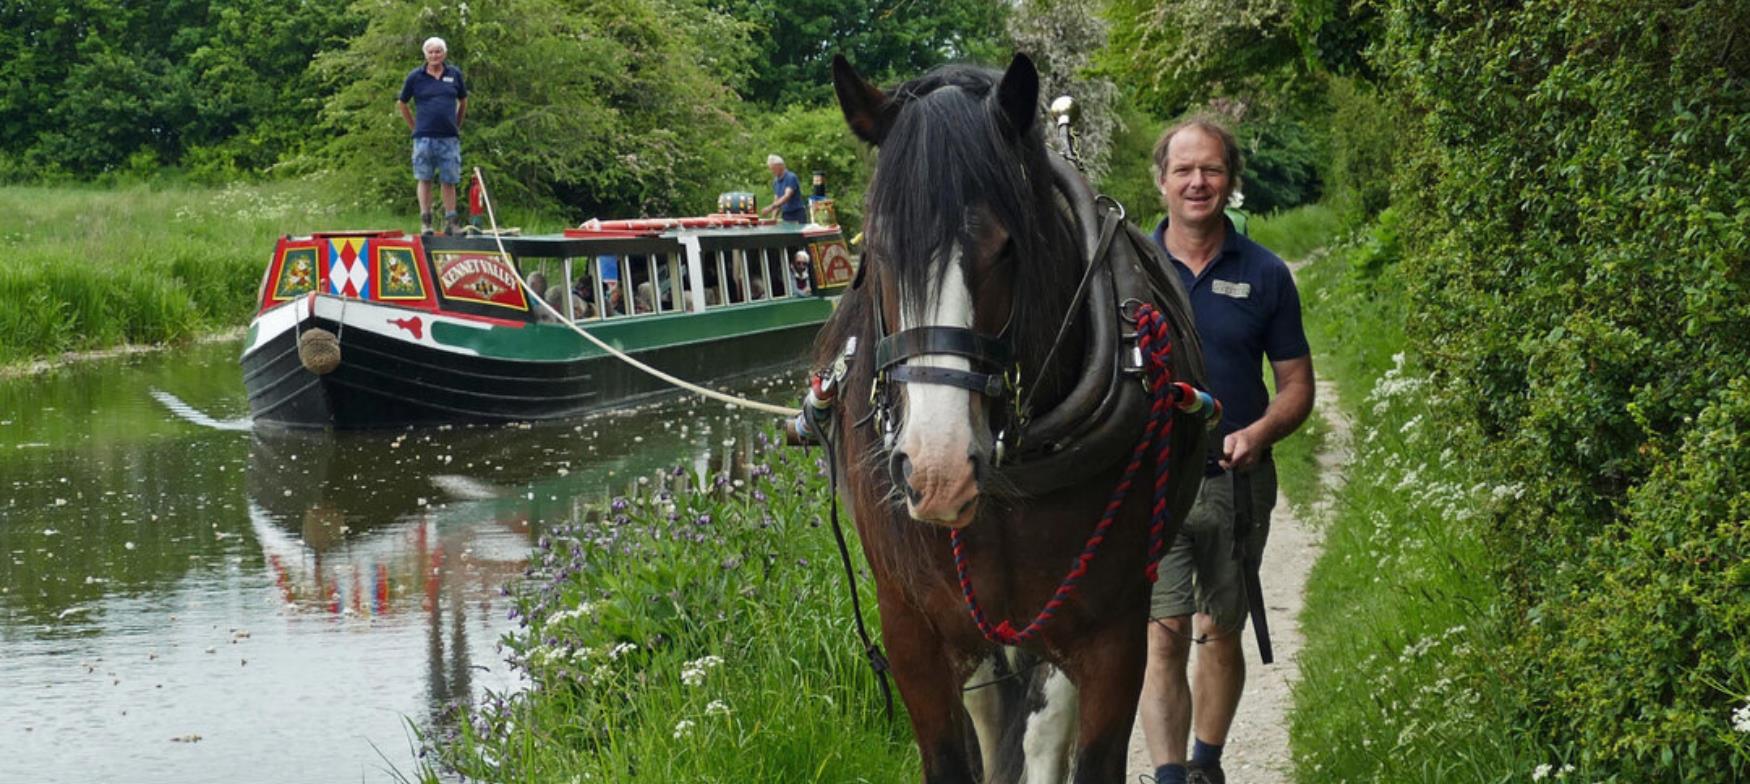 Kennet Horse Boat Company Tours